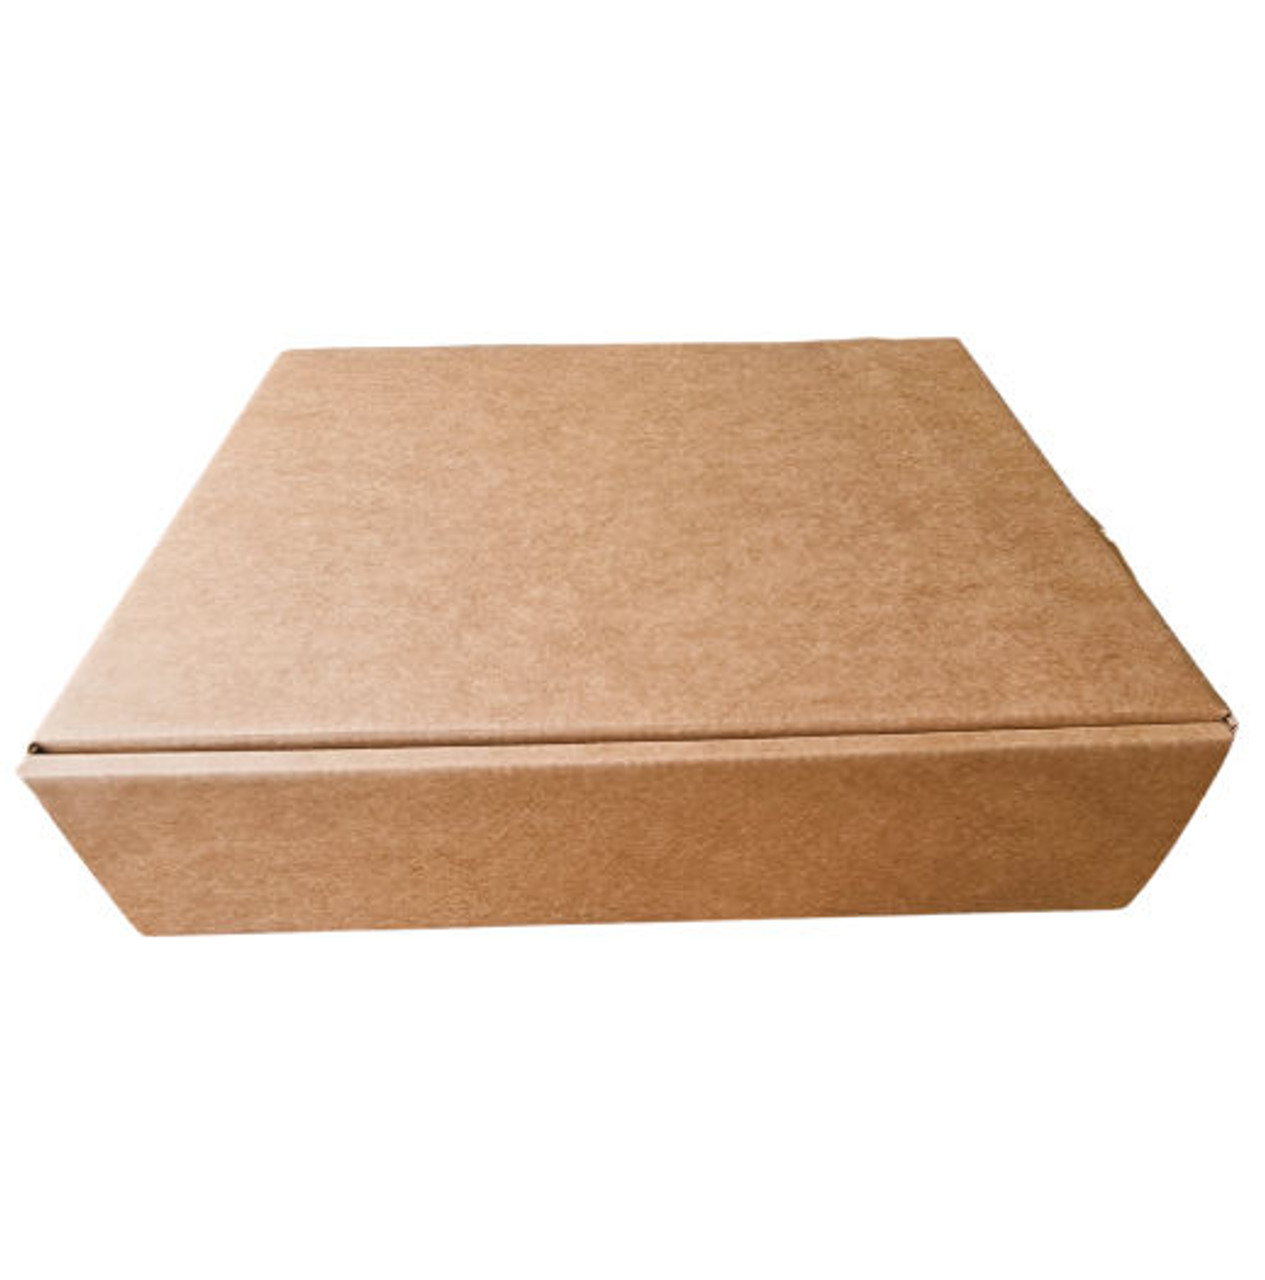 Heavy Duty Quality Corrugated One Piece Freezer/Bakery/Gift Box  345 x 295 x 90 mm ( see qty options )